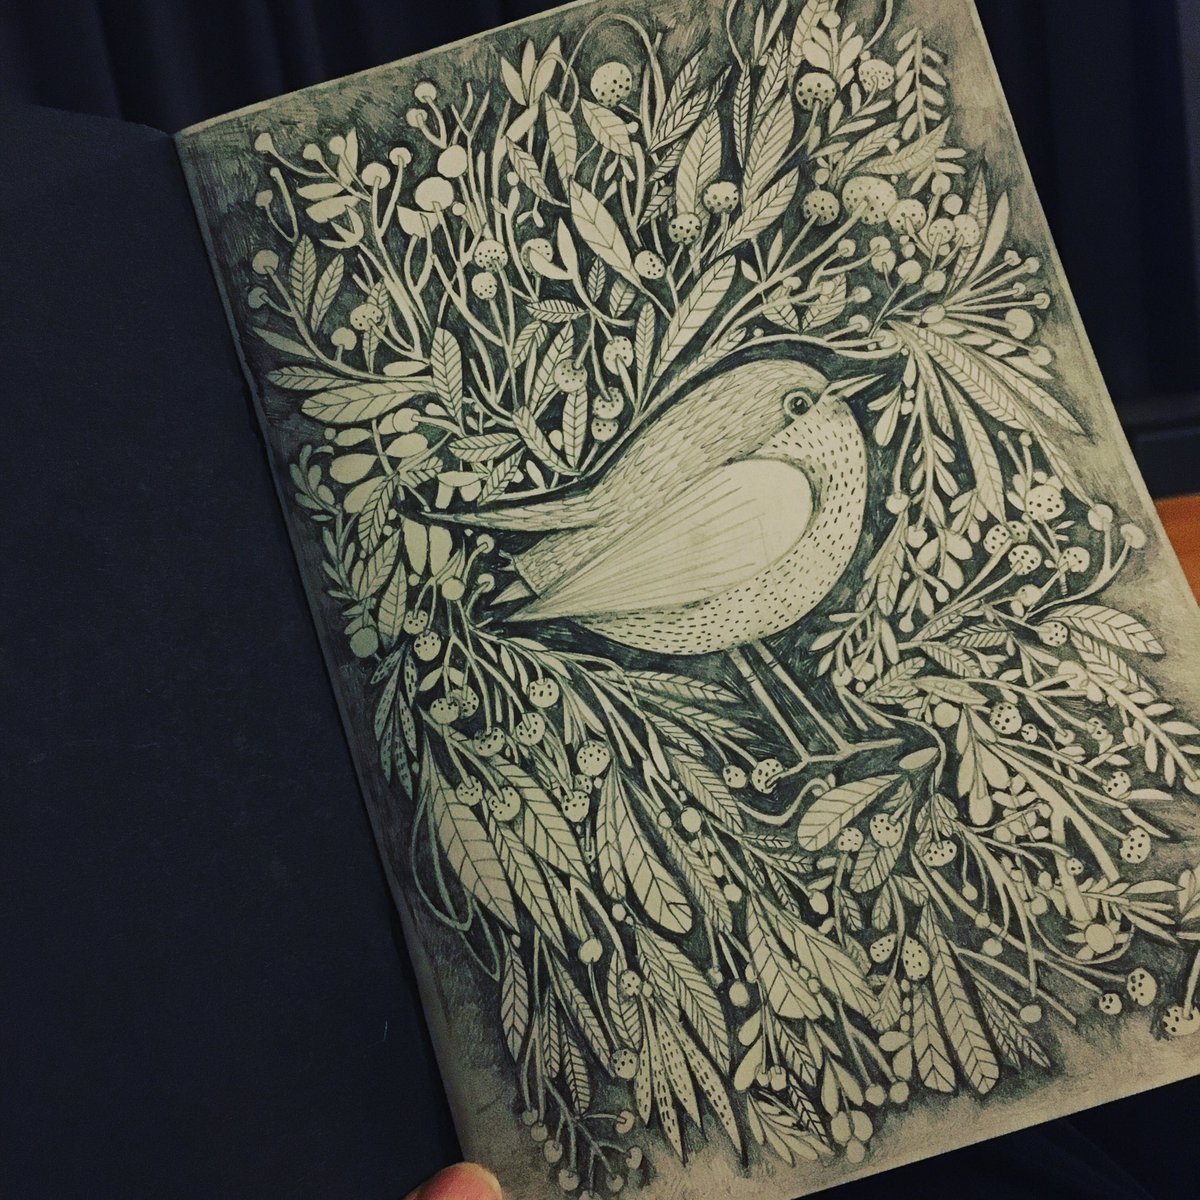 First page of my 2020 sketchbook finished! This piece was inspired by the maze at @burtonagneshall which is home to the most gorgeous little birds!! #thevisitingbook #illustration #pencildrawing #sketchbook #sketchbookdrawing #art #2020 #resolution2020 #published